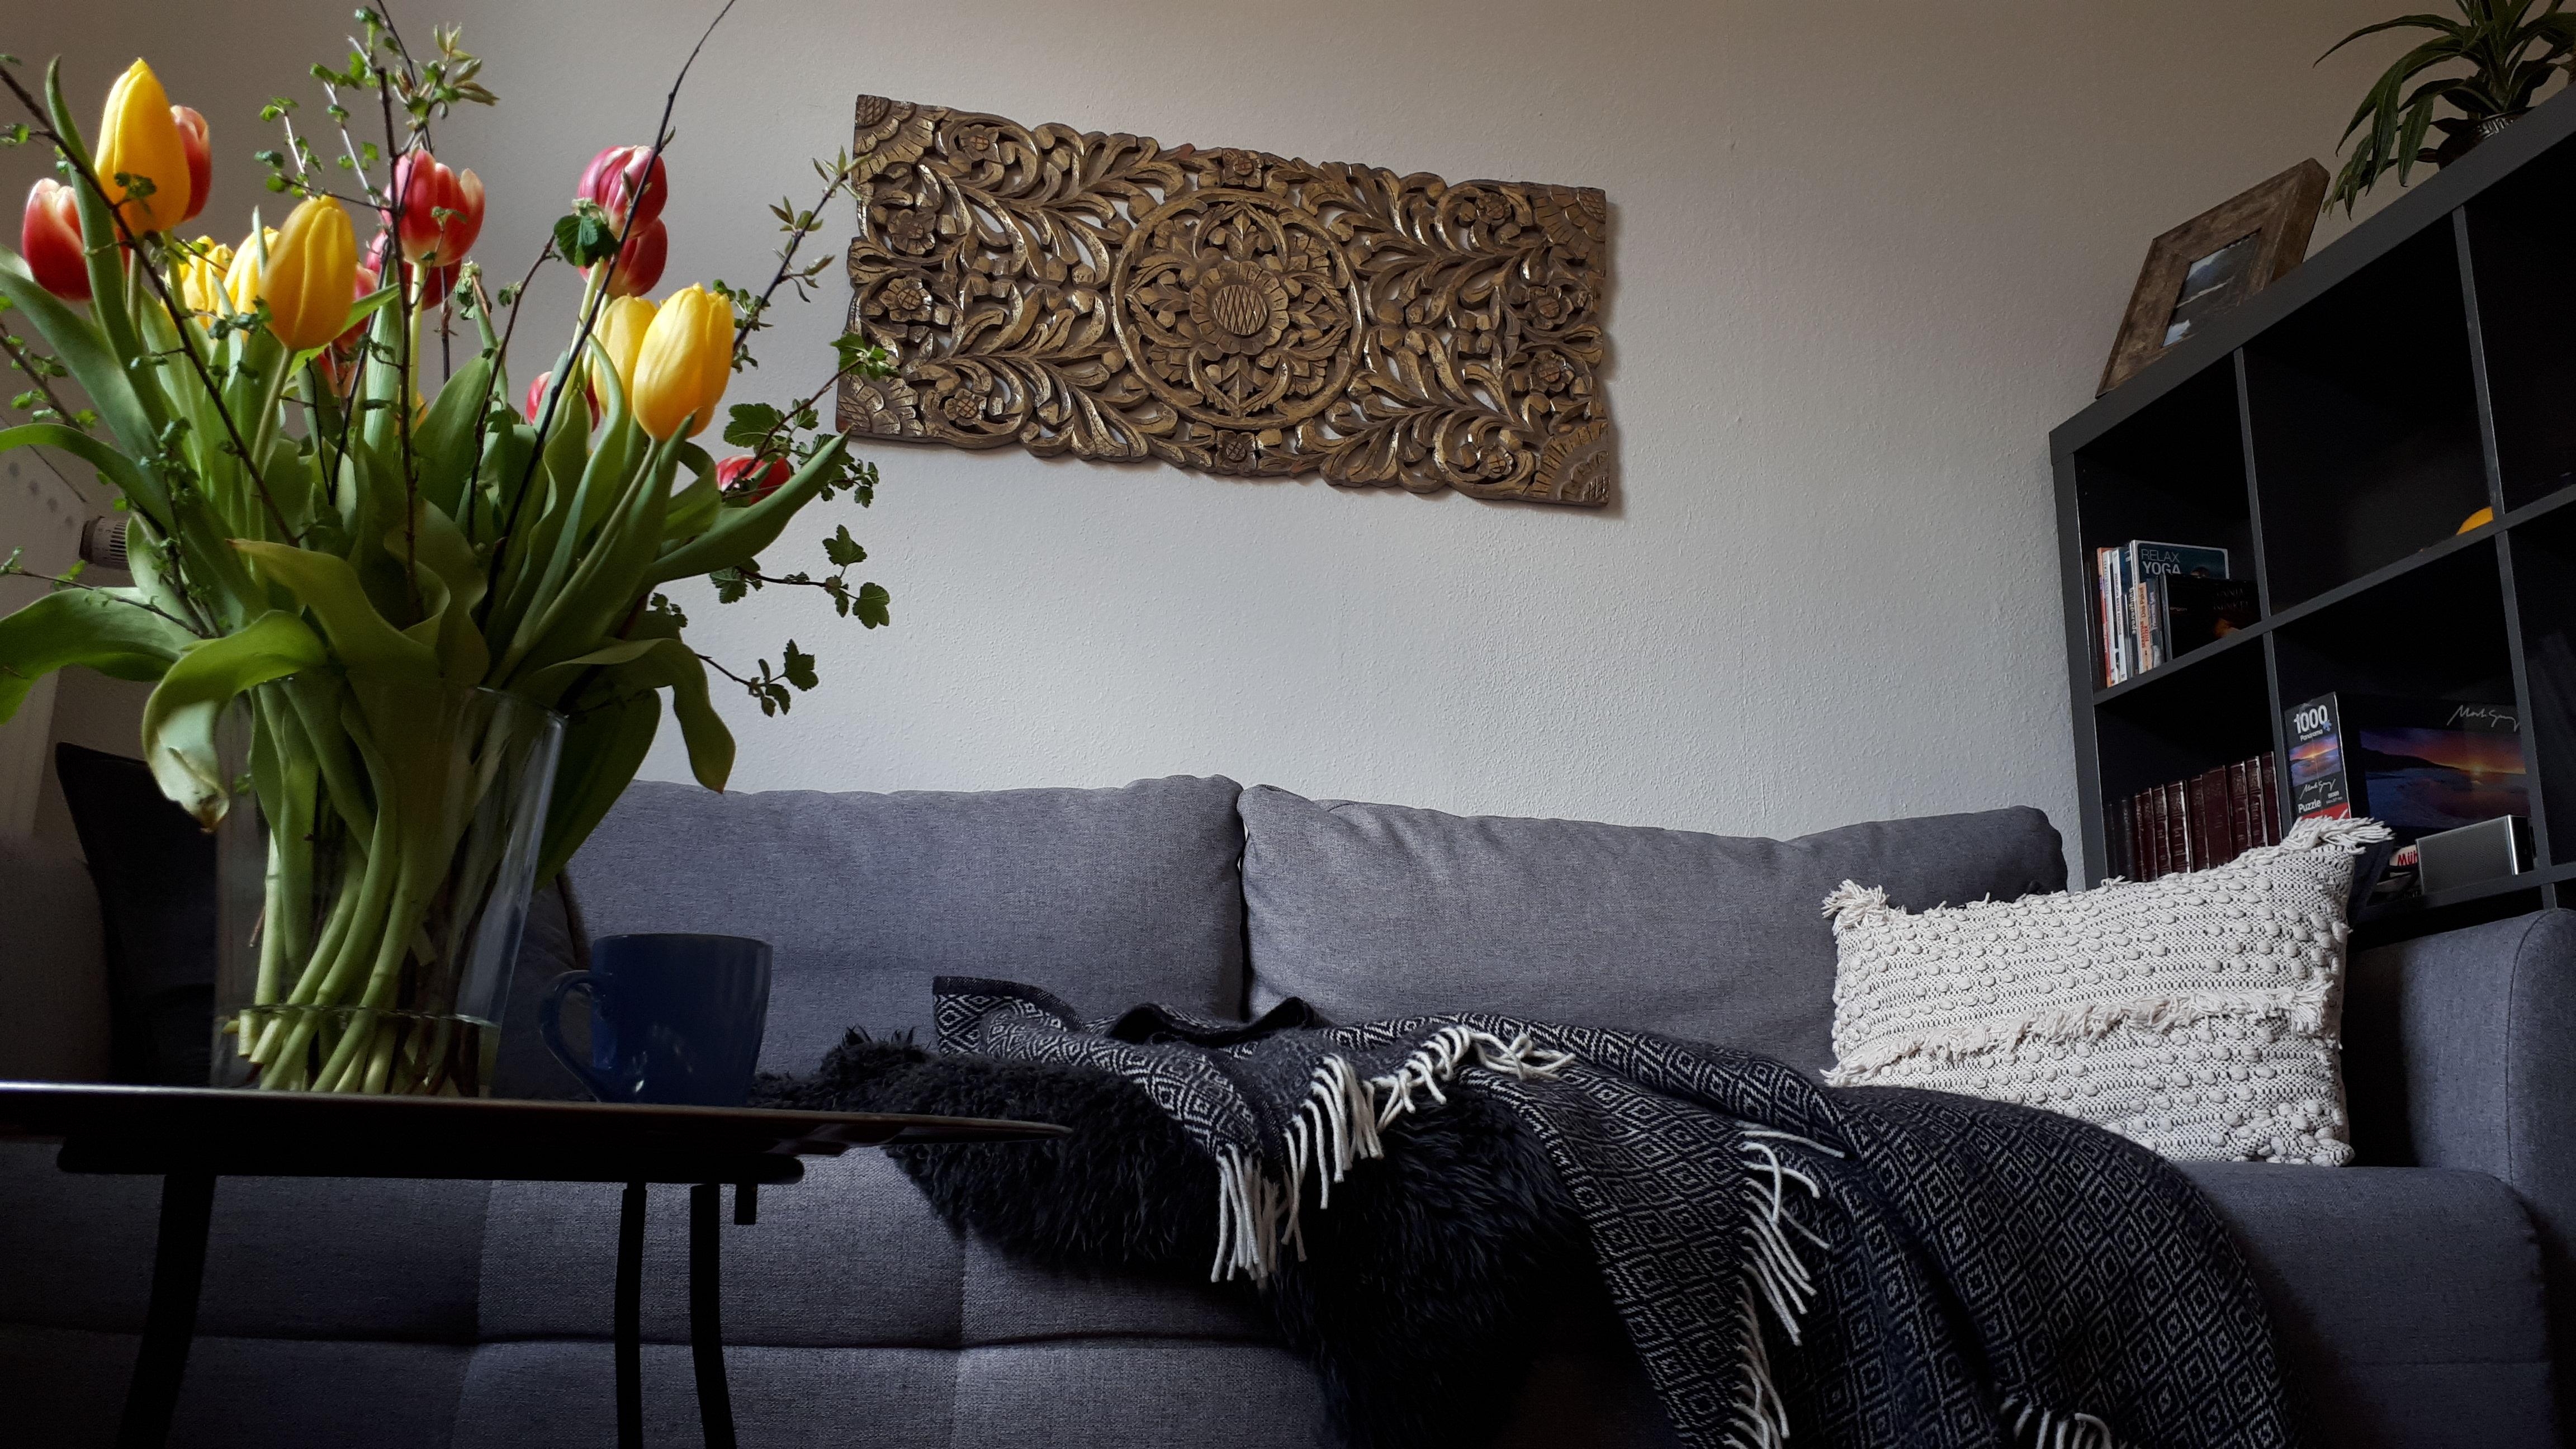 Mein Happyplace :) #tulpen #walldecoration #couch #cozy